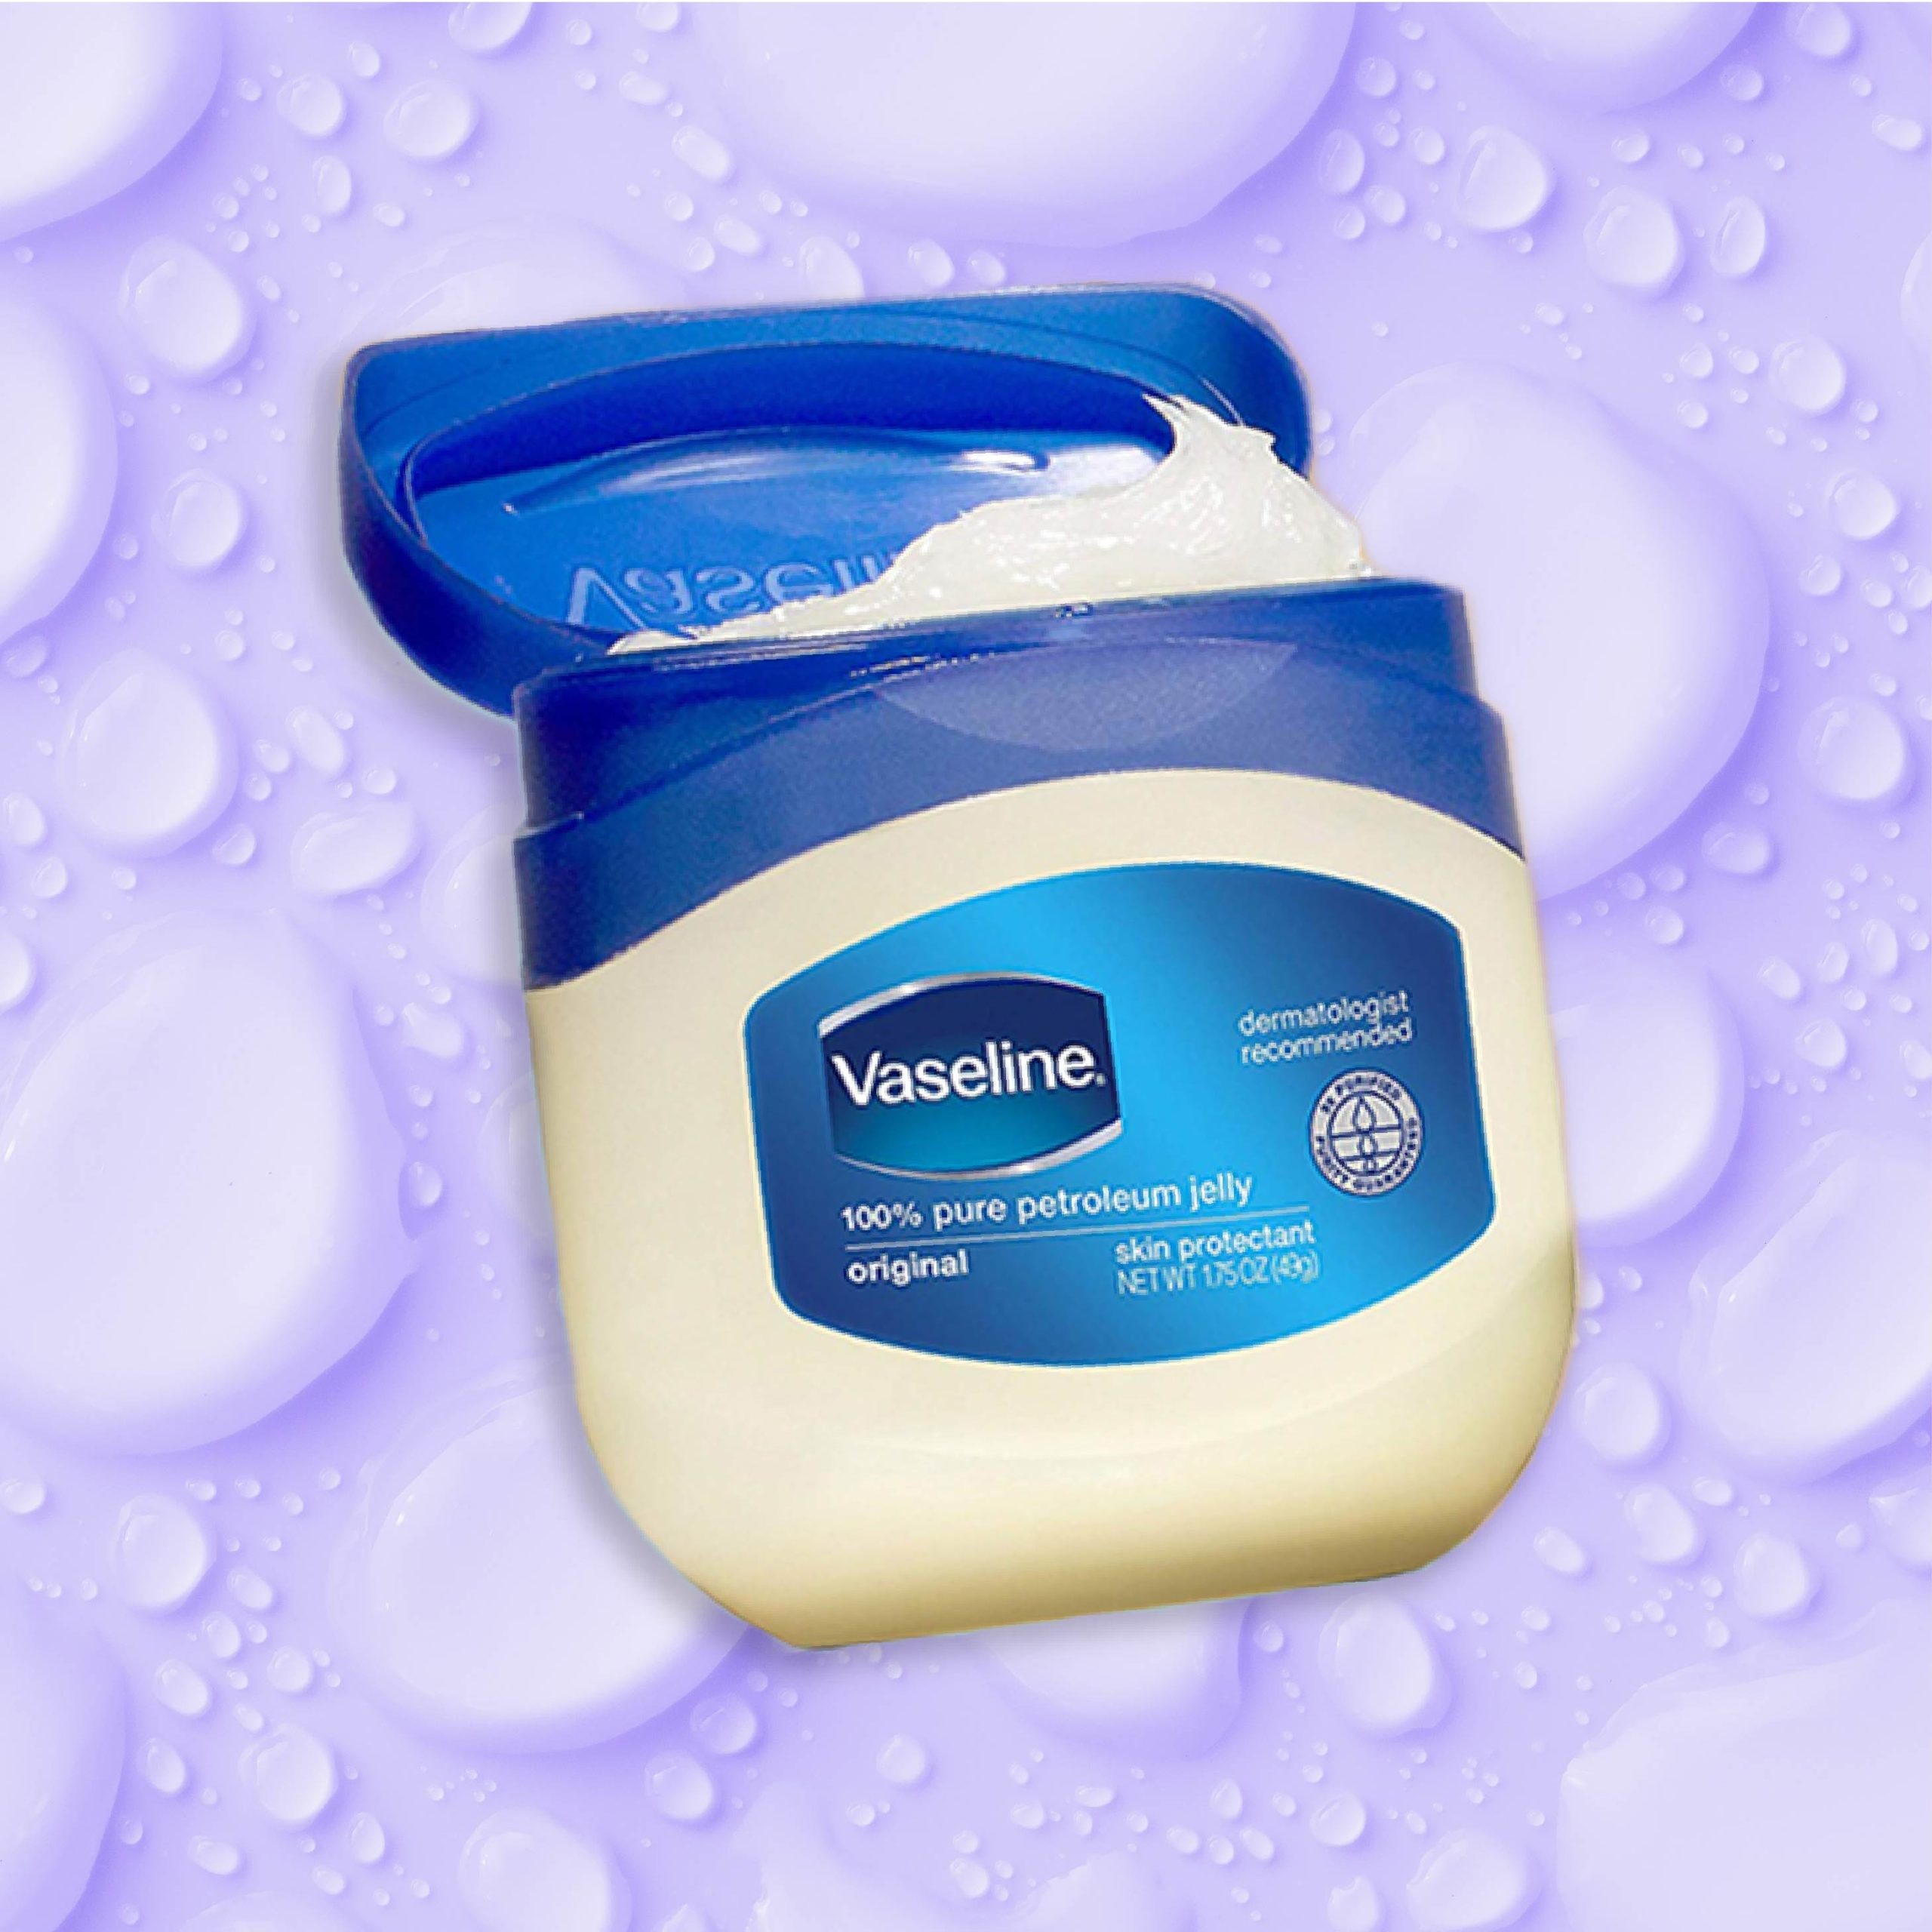 Here's What Happens When You Use Vaseline as a Moisturizer